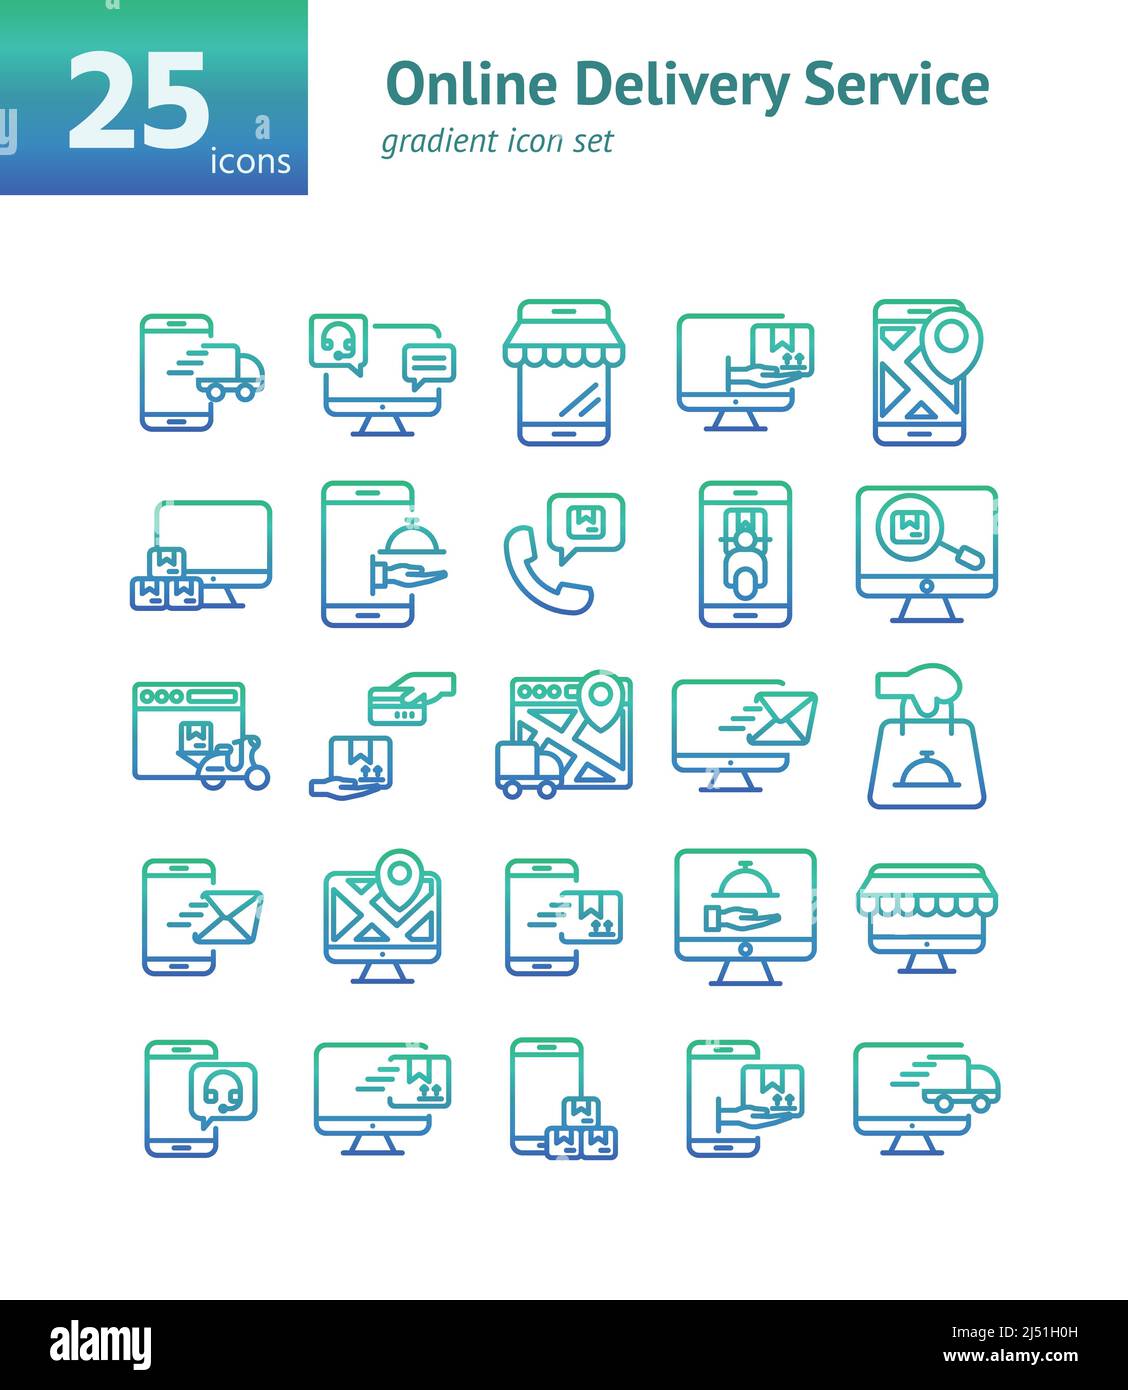 Online Delivery Service gradient icon set. Vector and Illustration. Stock Vector